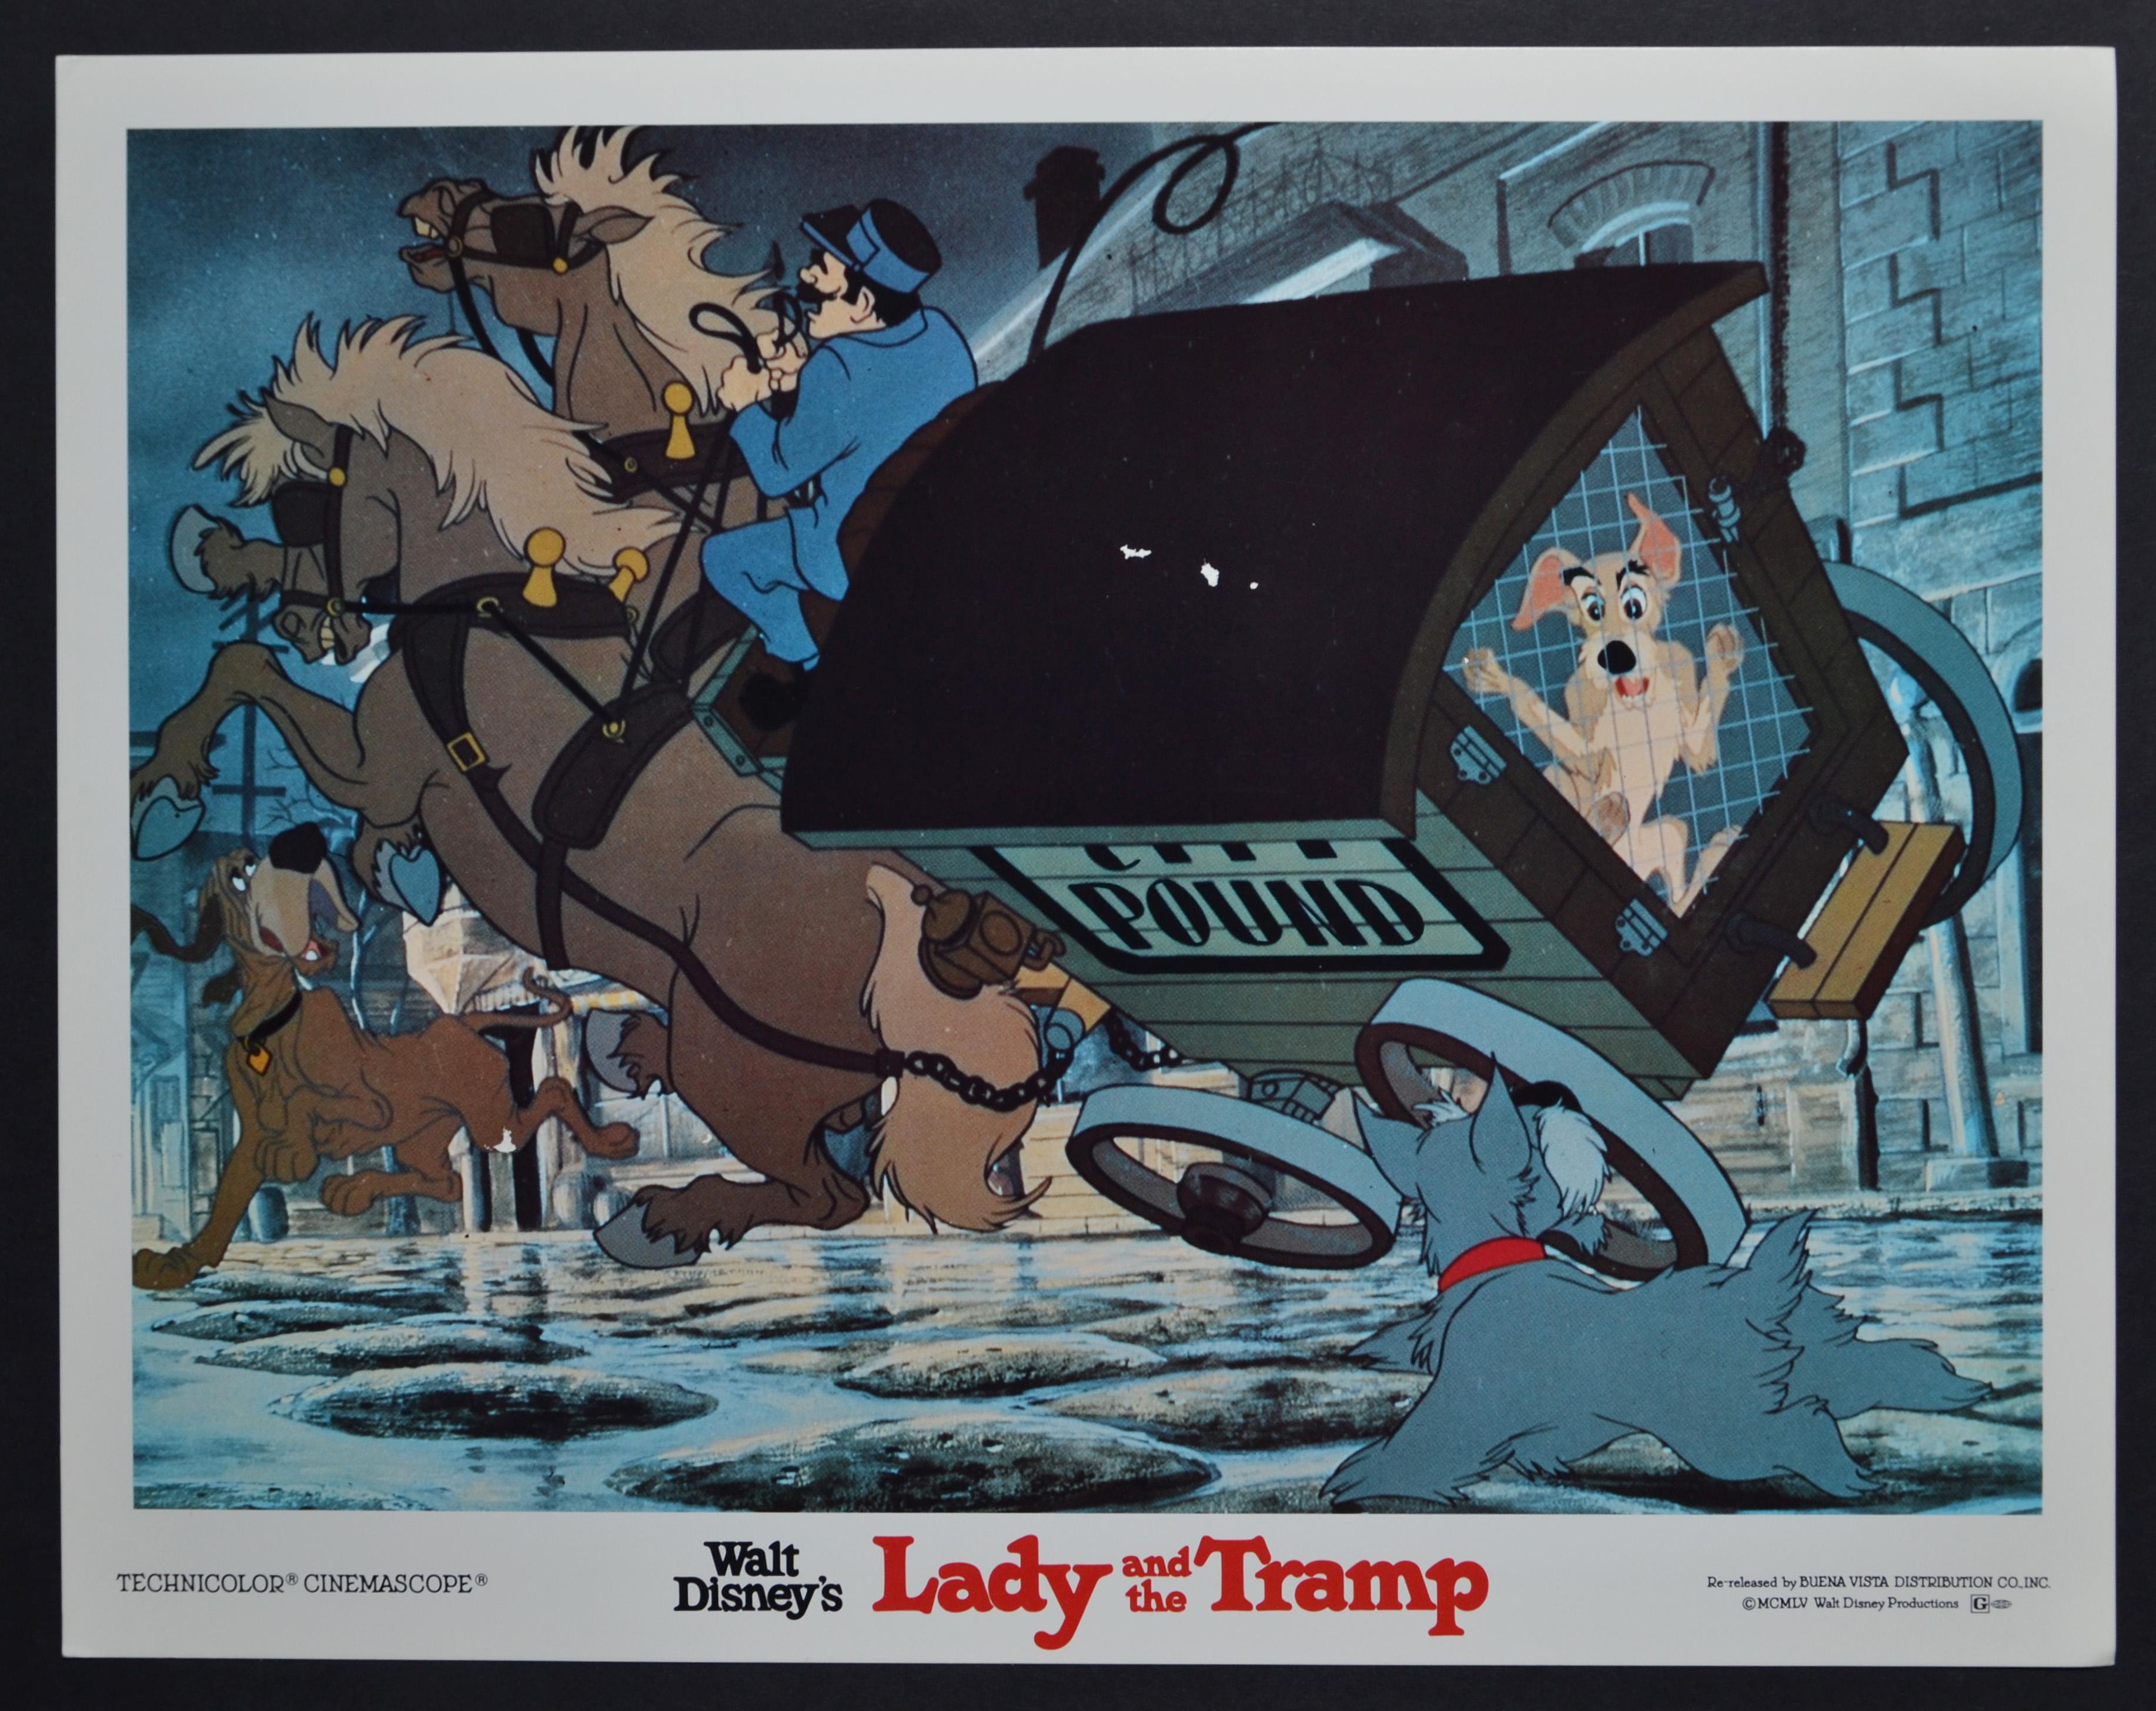 Unknown Interior Print - "Lady and the Tramp" Lobby Card of Walt Disney’s Movie, USA 1955.